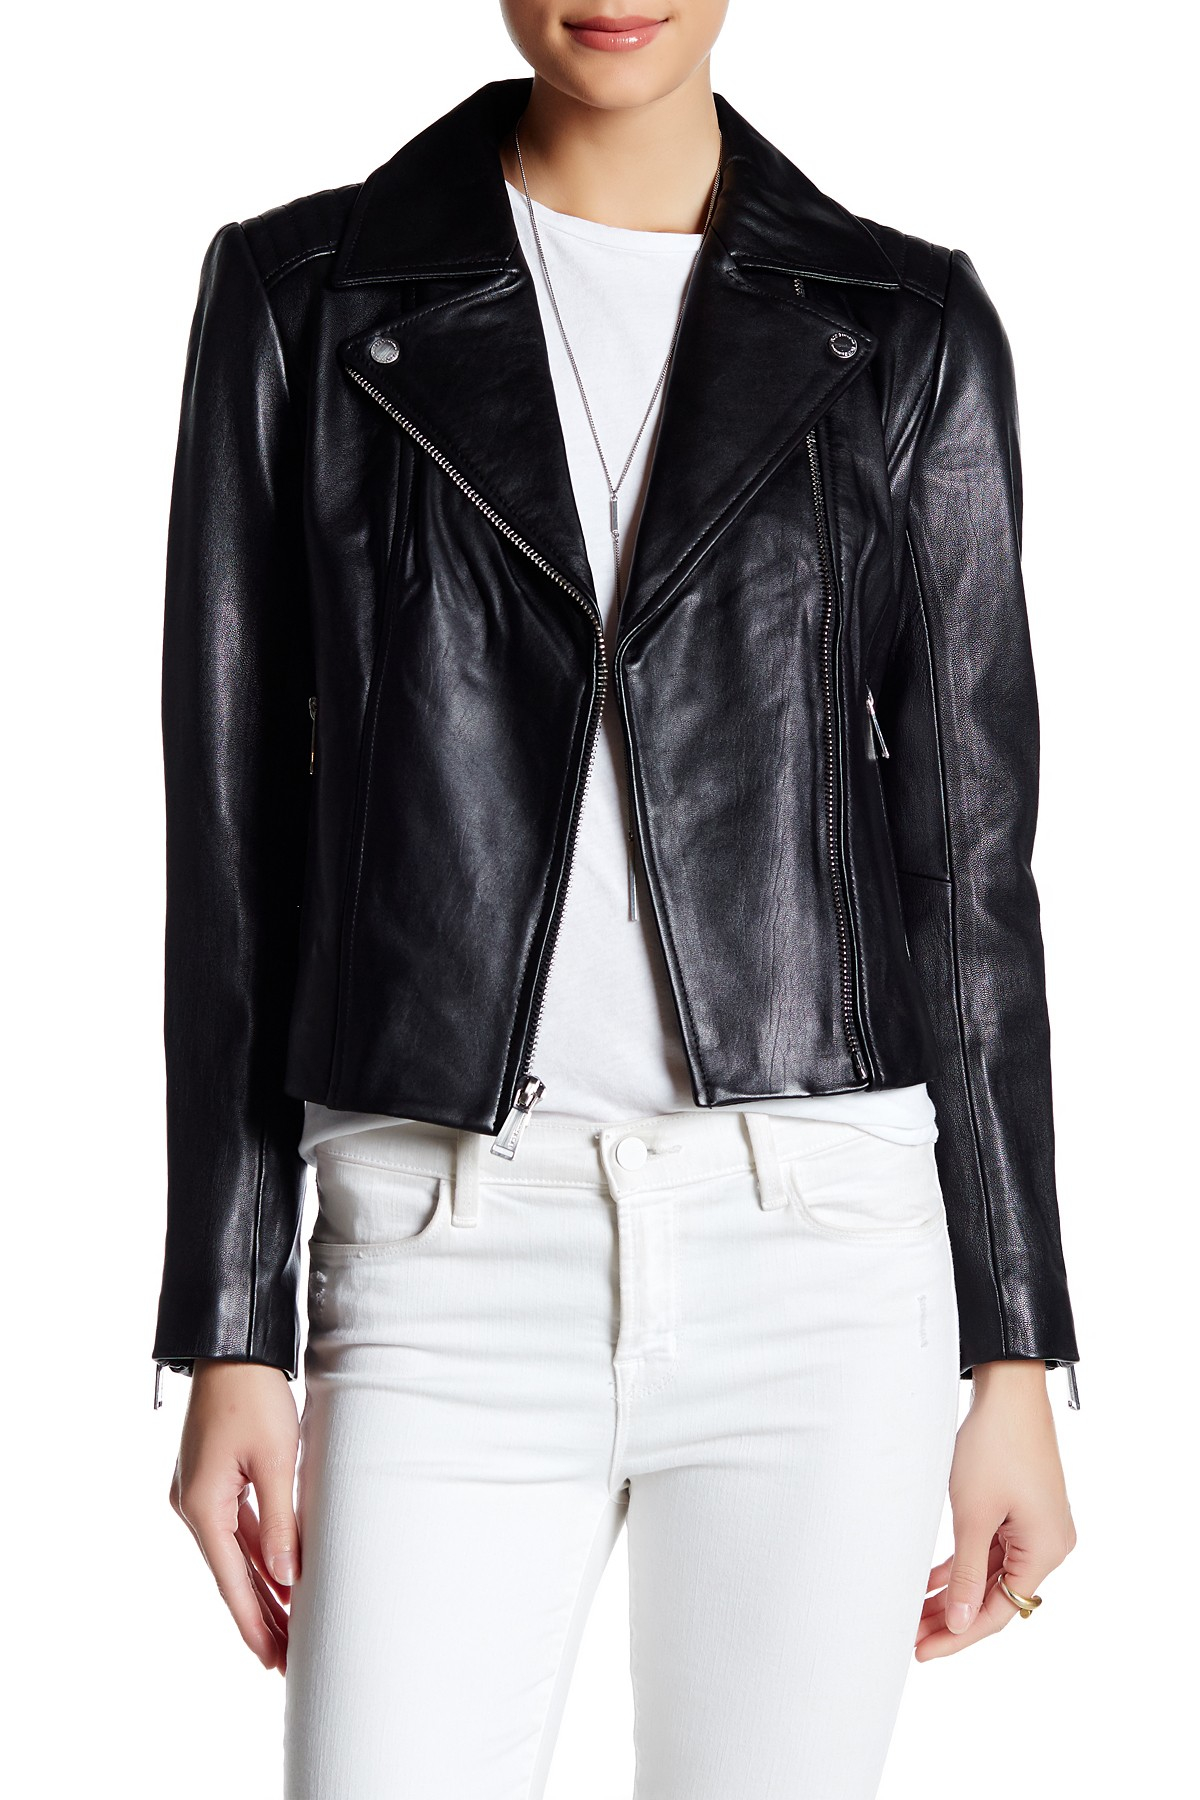 Lyst - Bcbgeneration Classic Leather Moto Jacket in Black